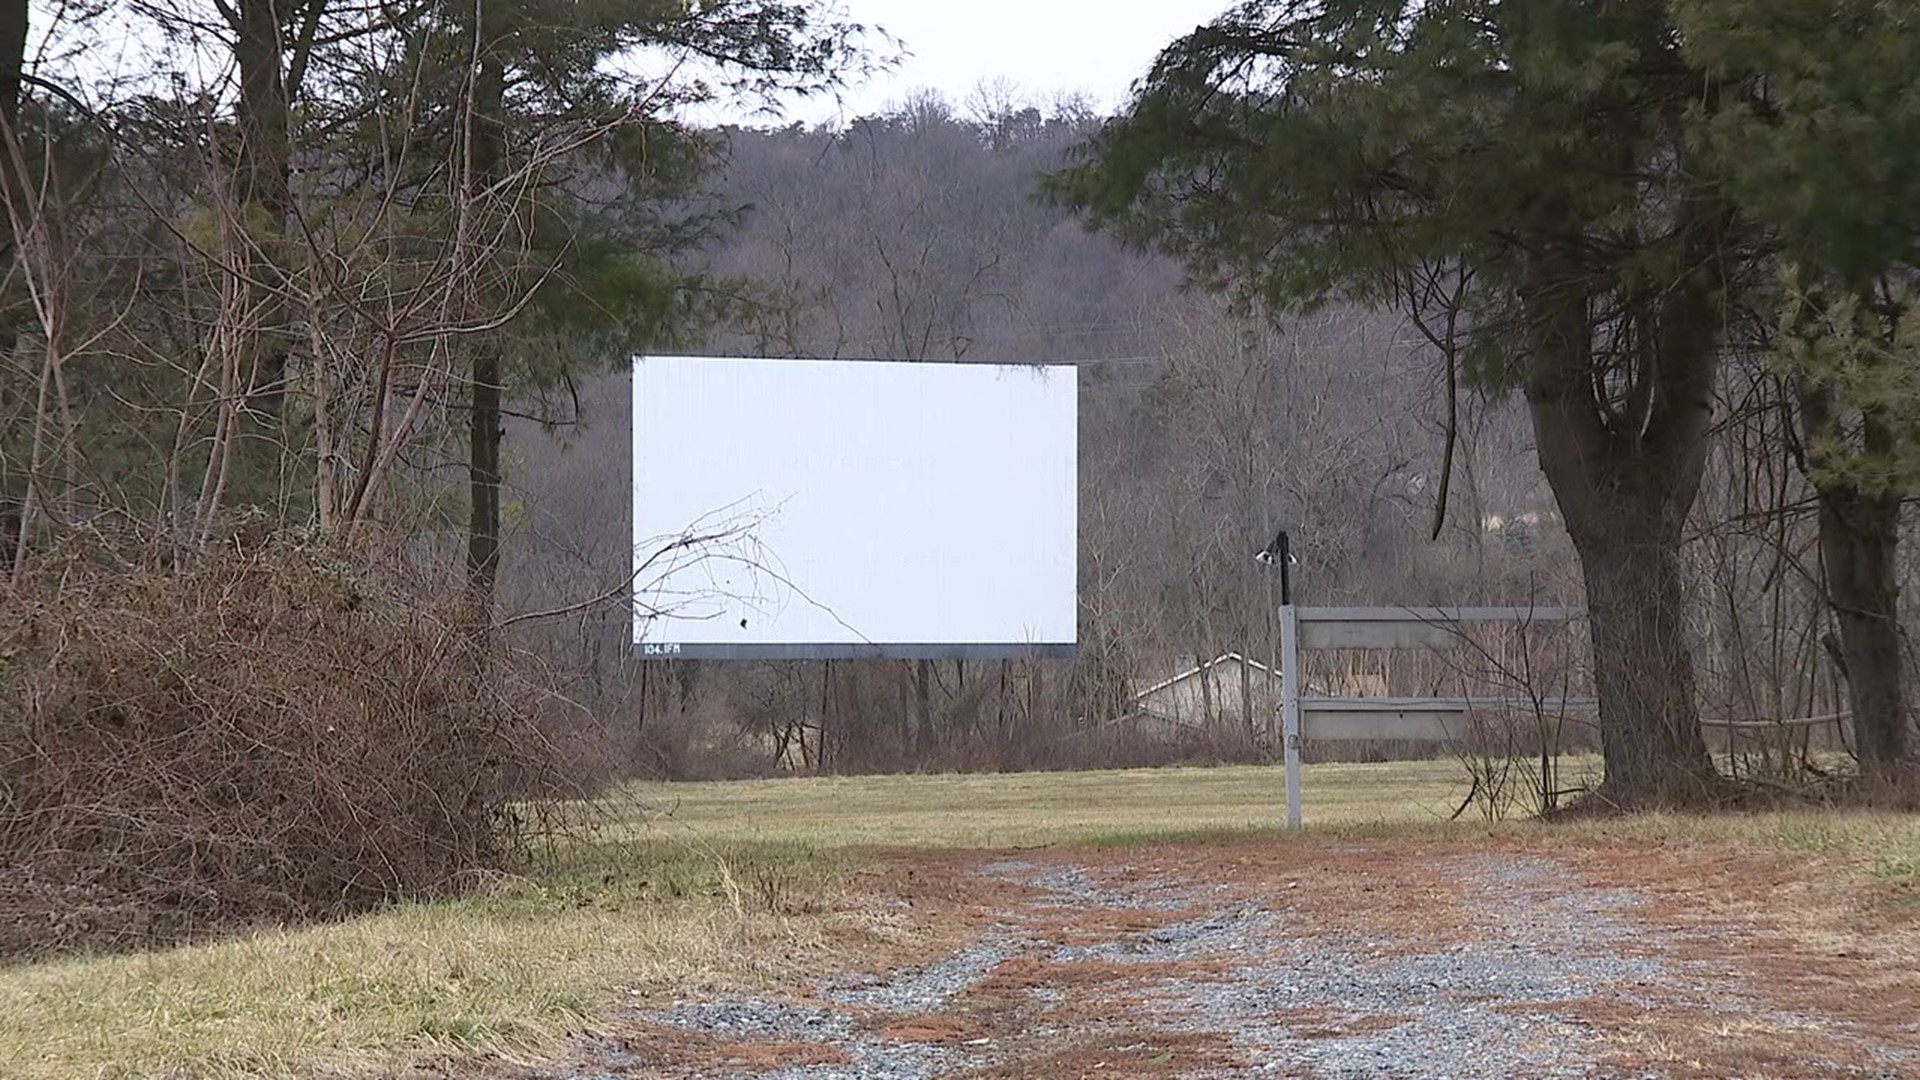 Last year, the Point Drive-In in Northumberland County announced it was closing, but this week the owners announced that is no longer the case.